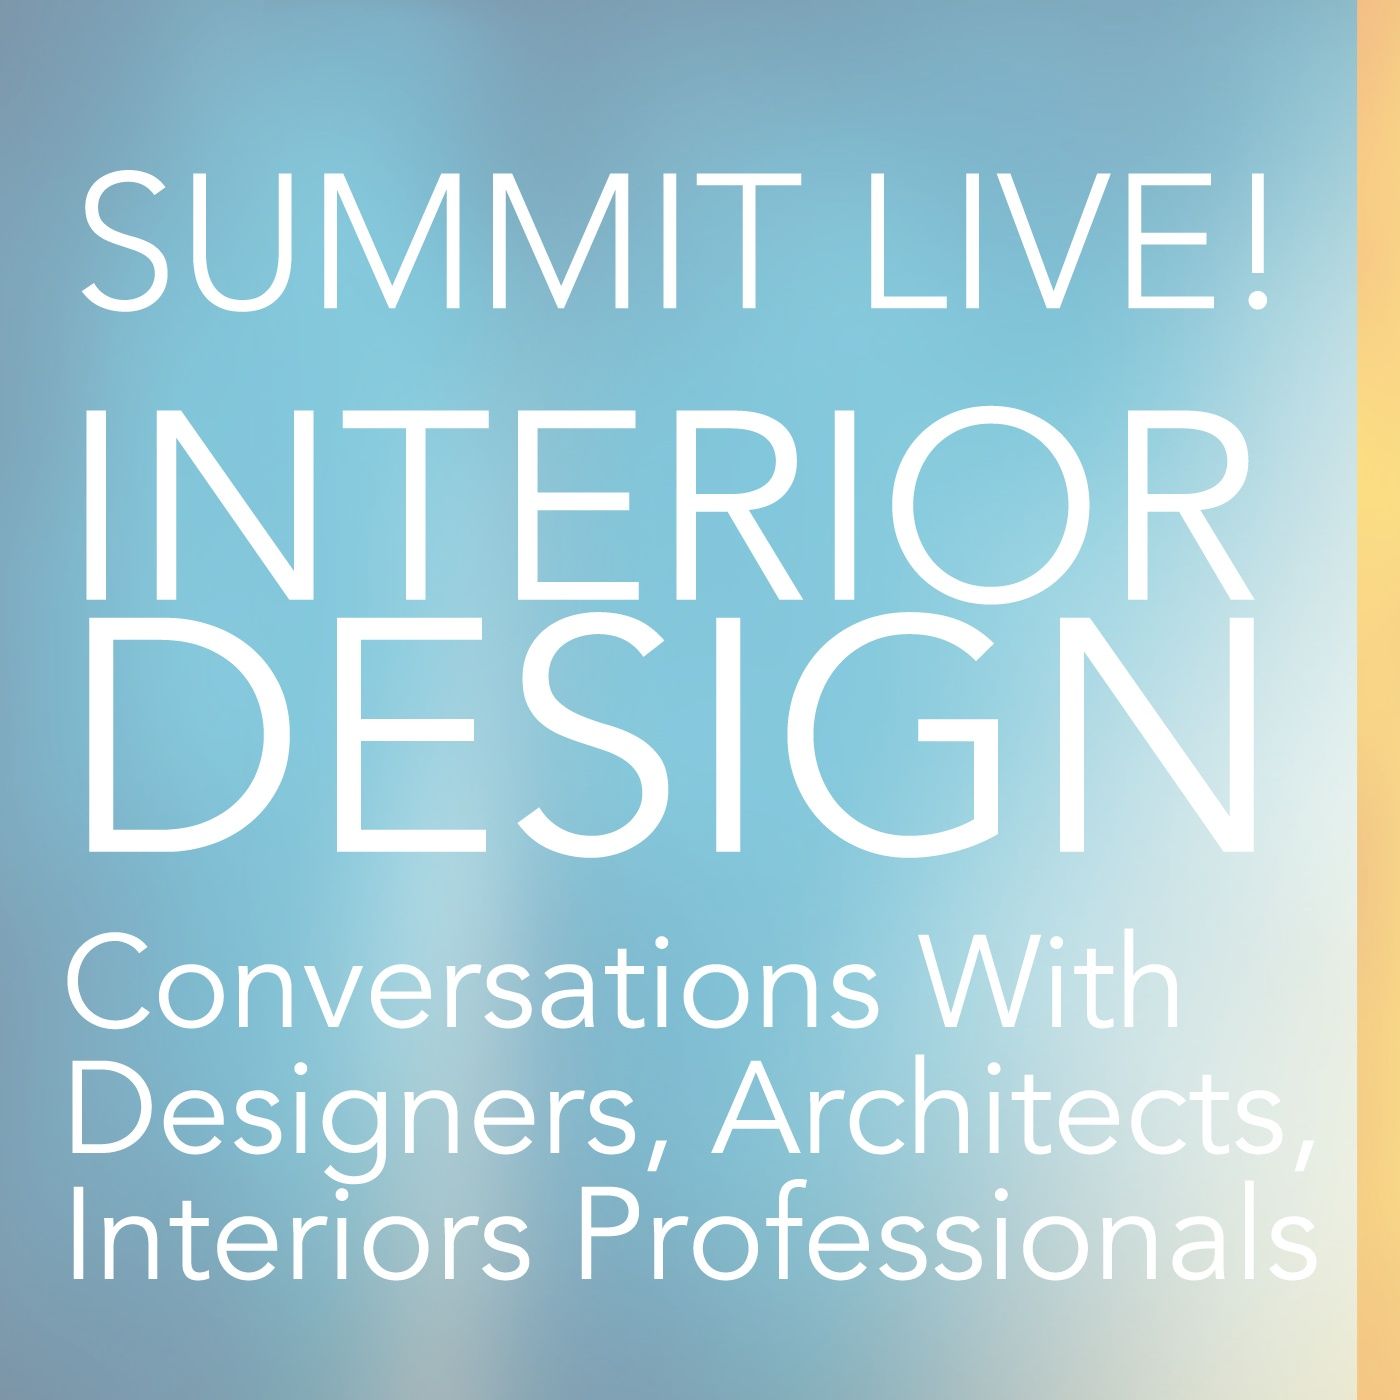 The Psychology of Interior Design with David Kepron_Summit Live Ep 41